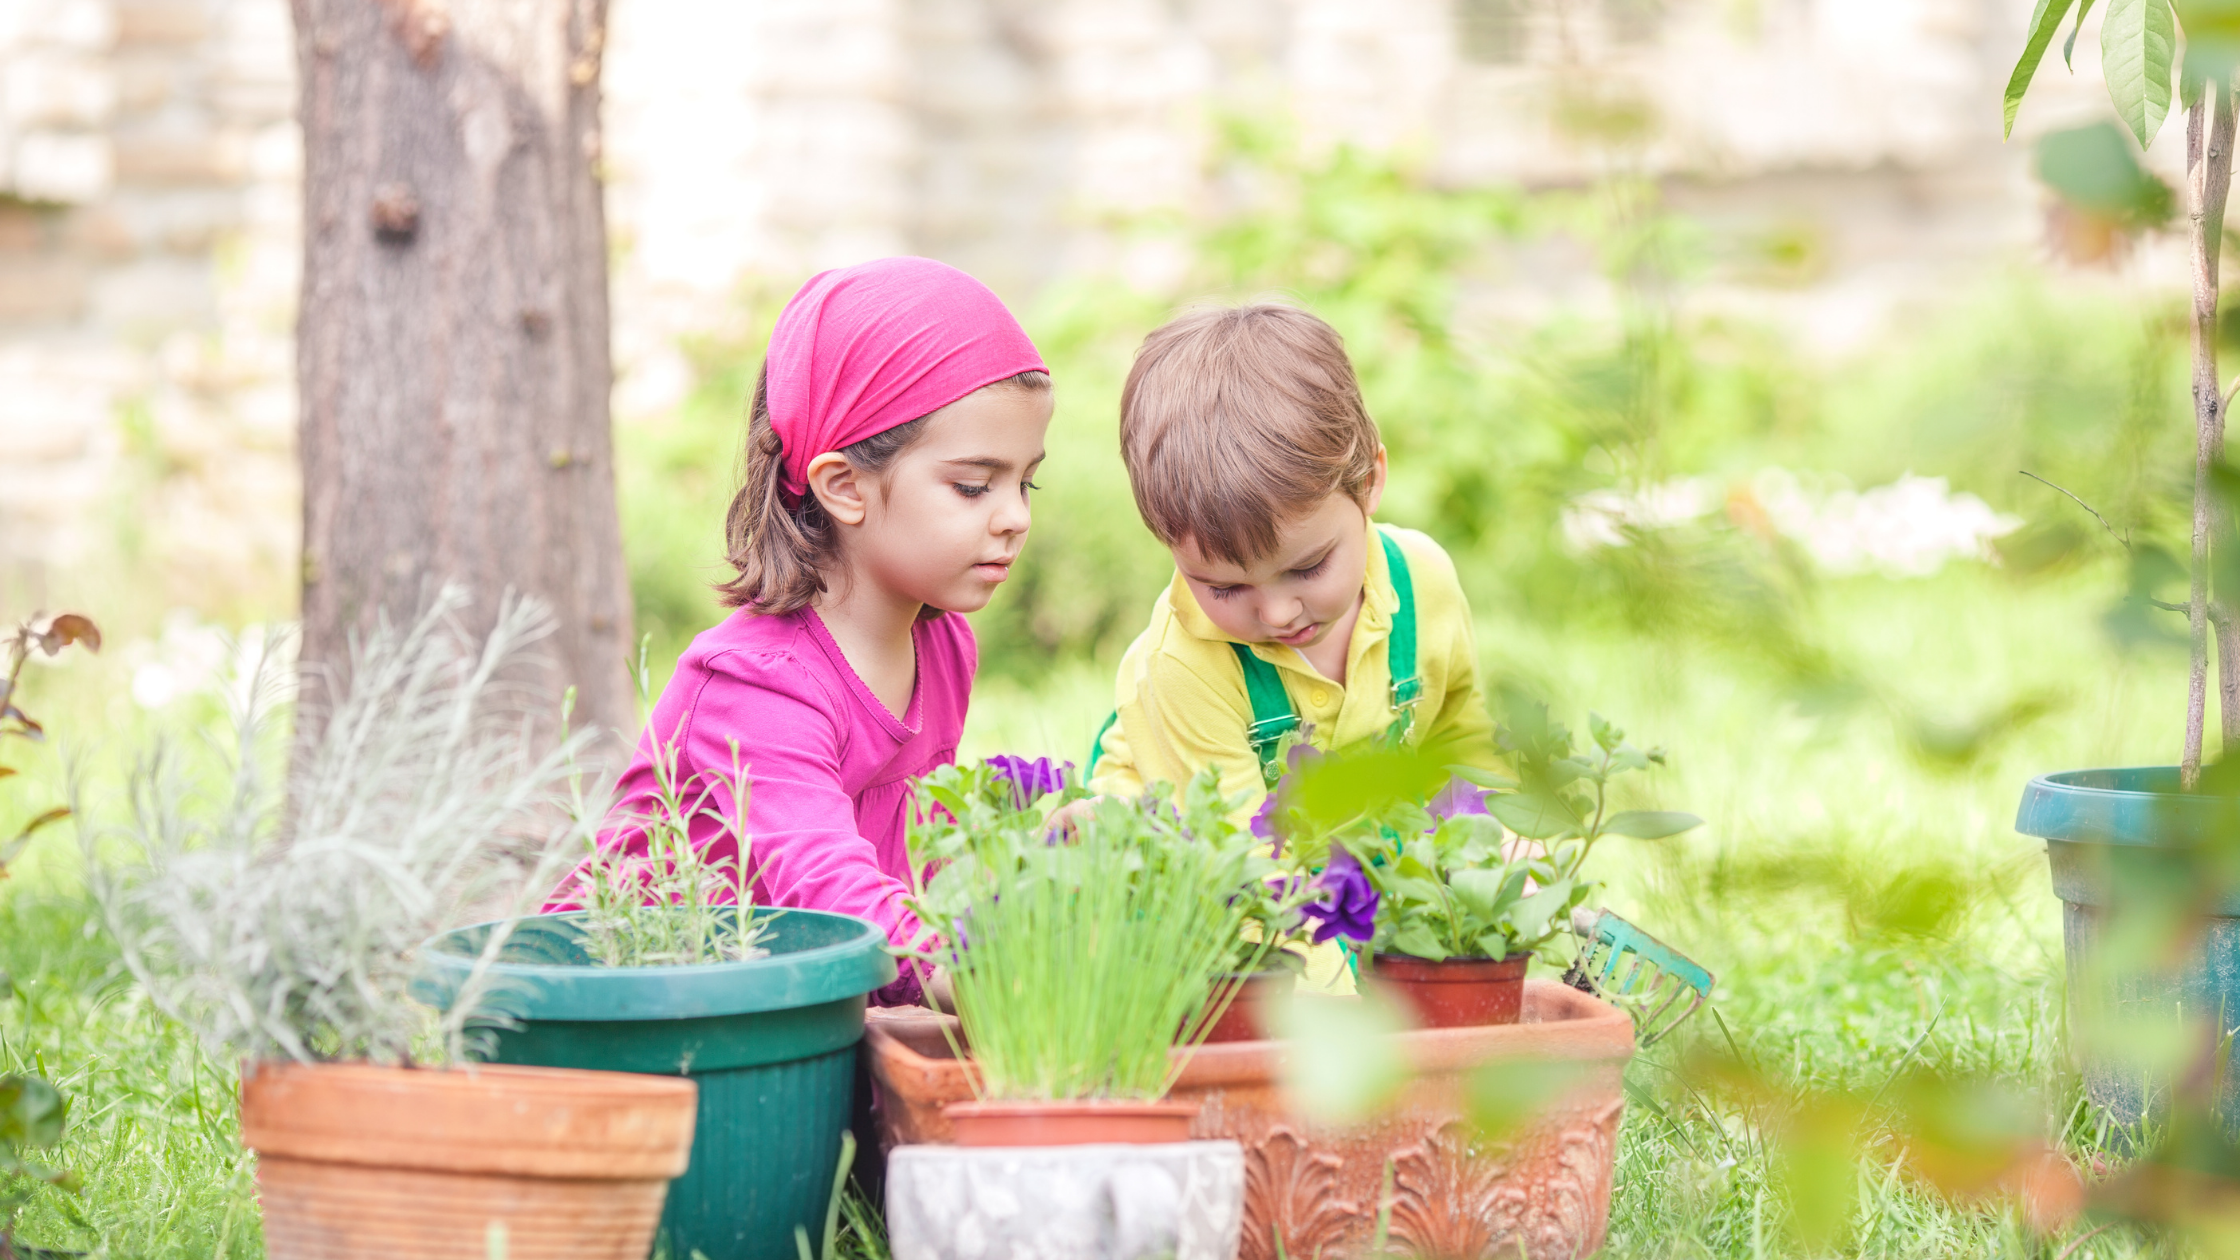 Two kids engaged in summer learning and exploration through plants from the outdoors